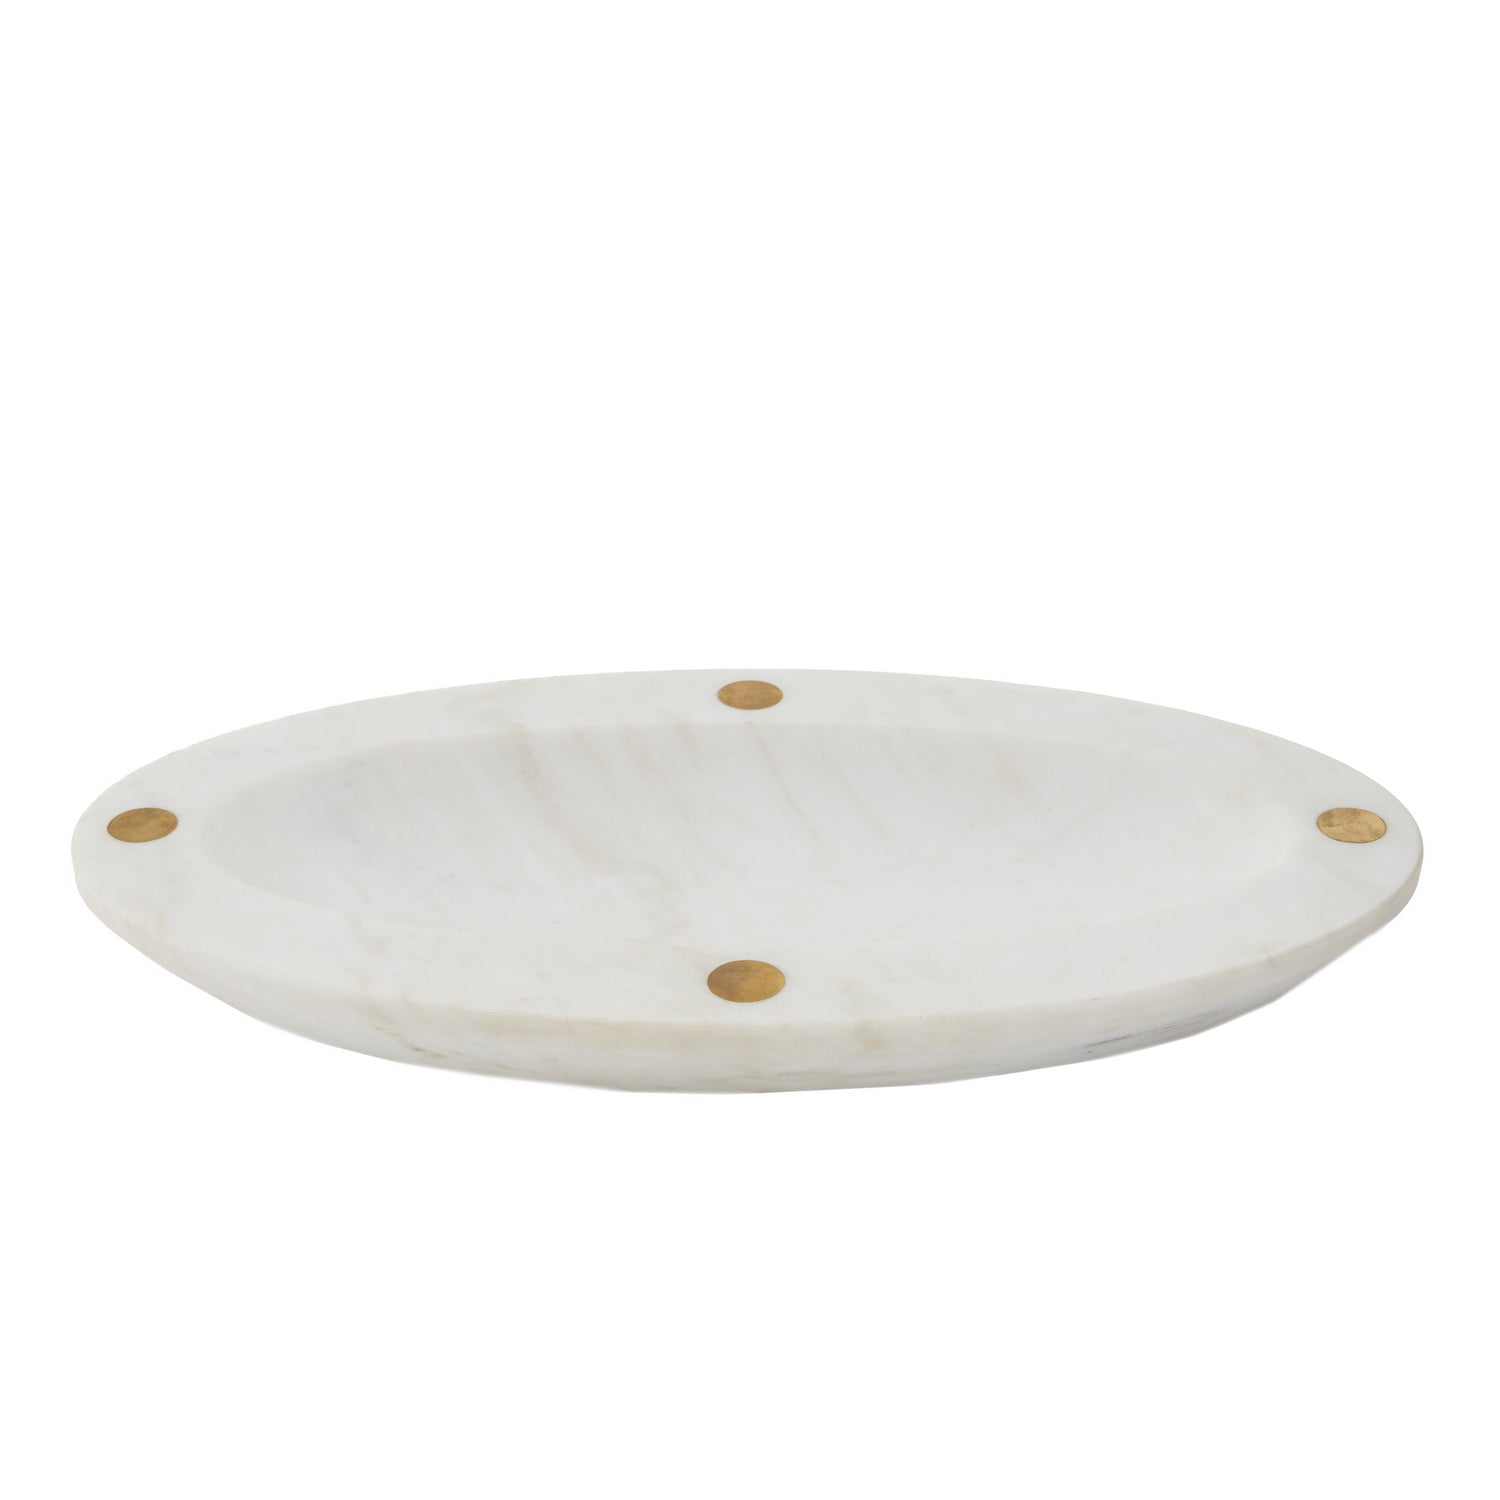 Centerpiece from the Palencia collection in White finish